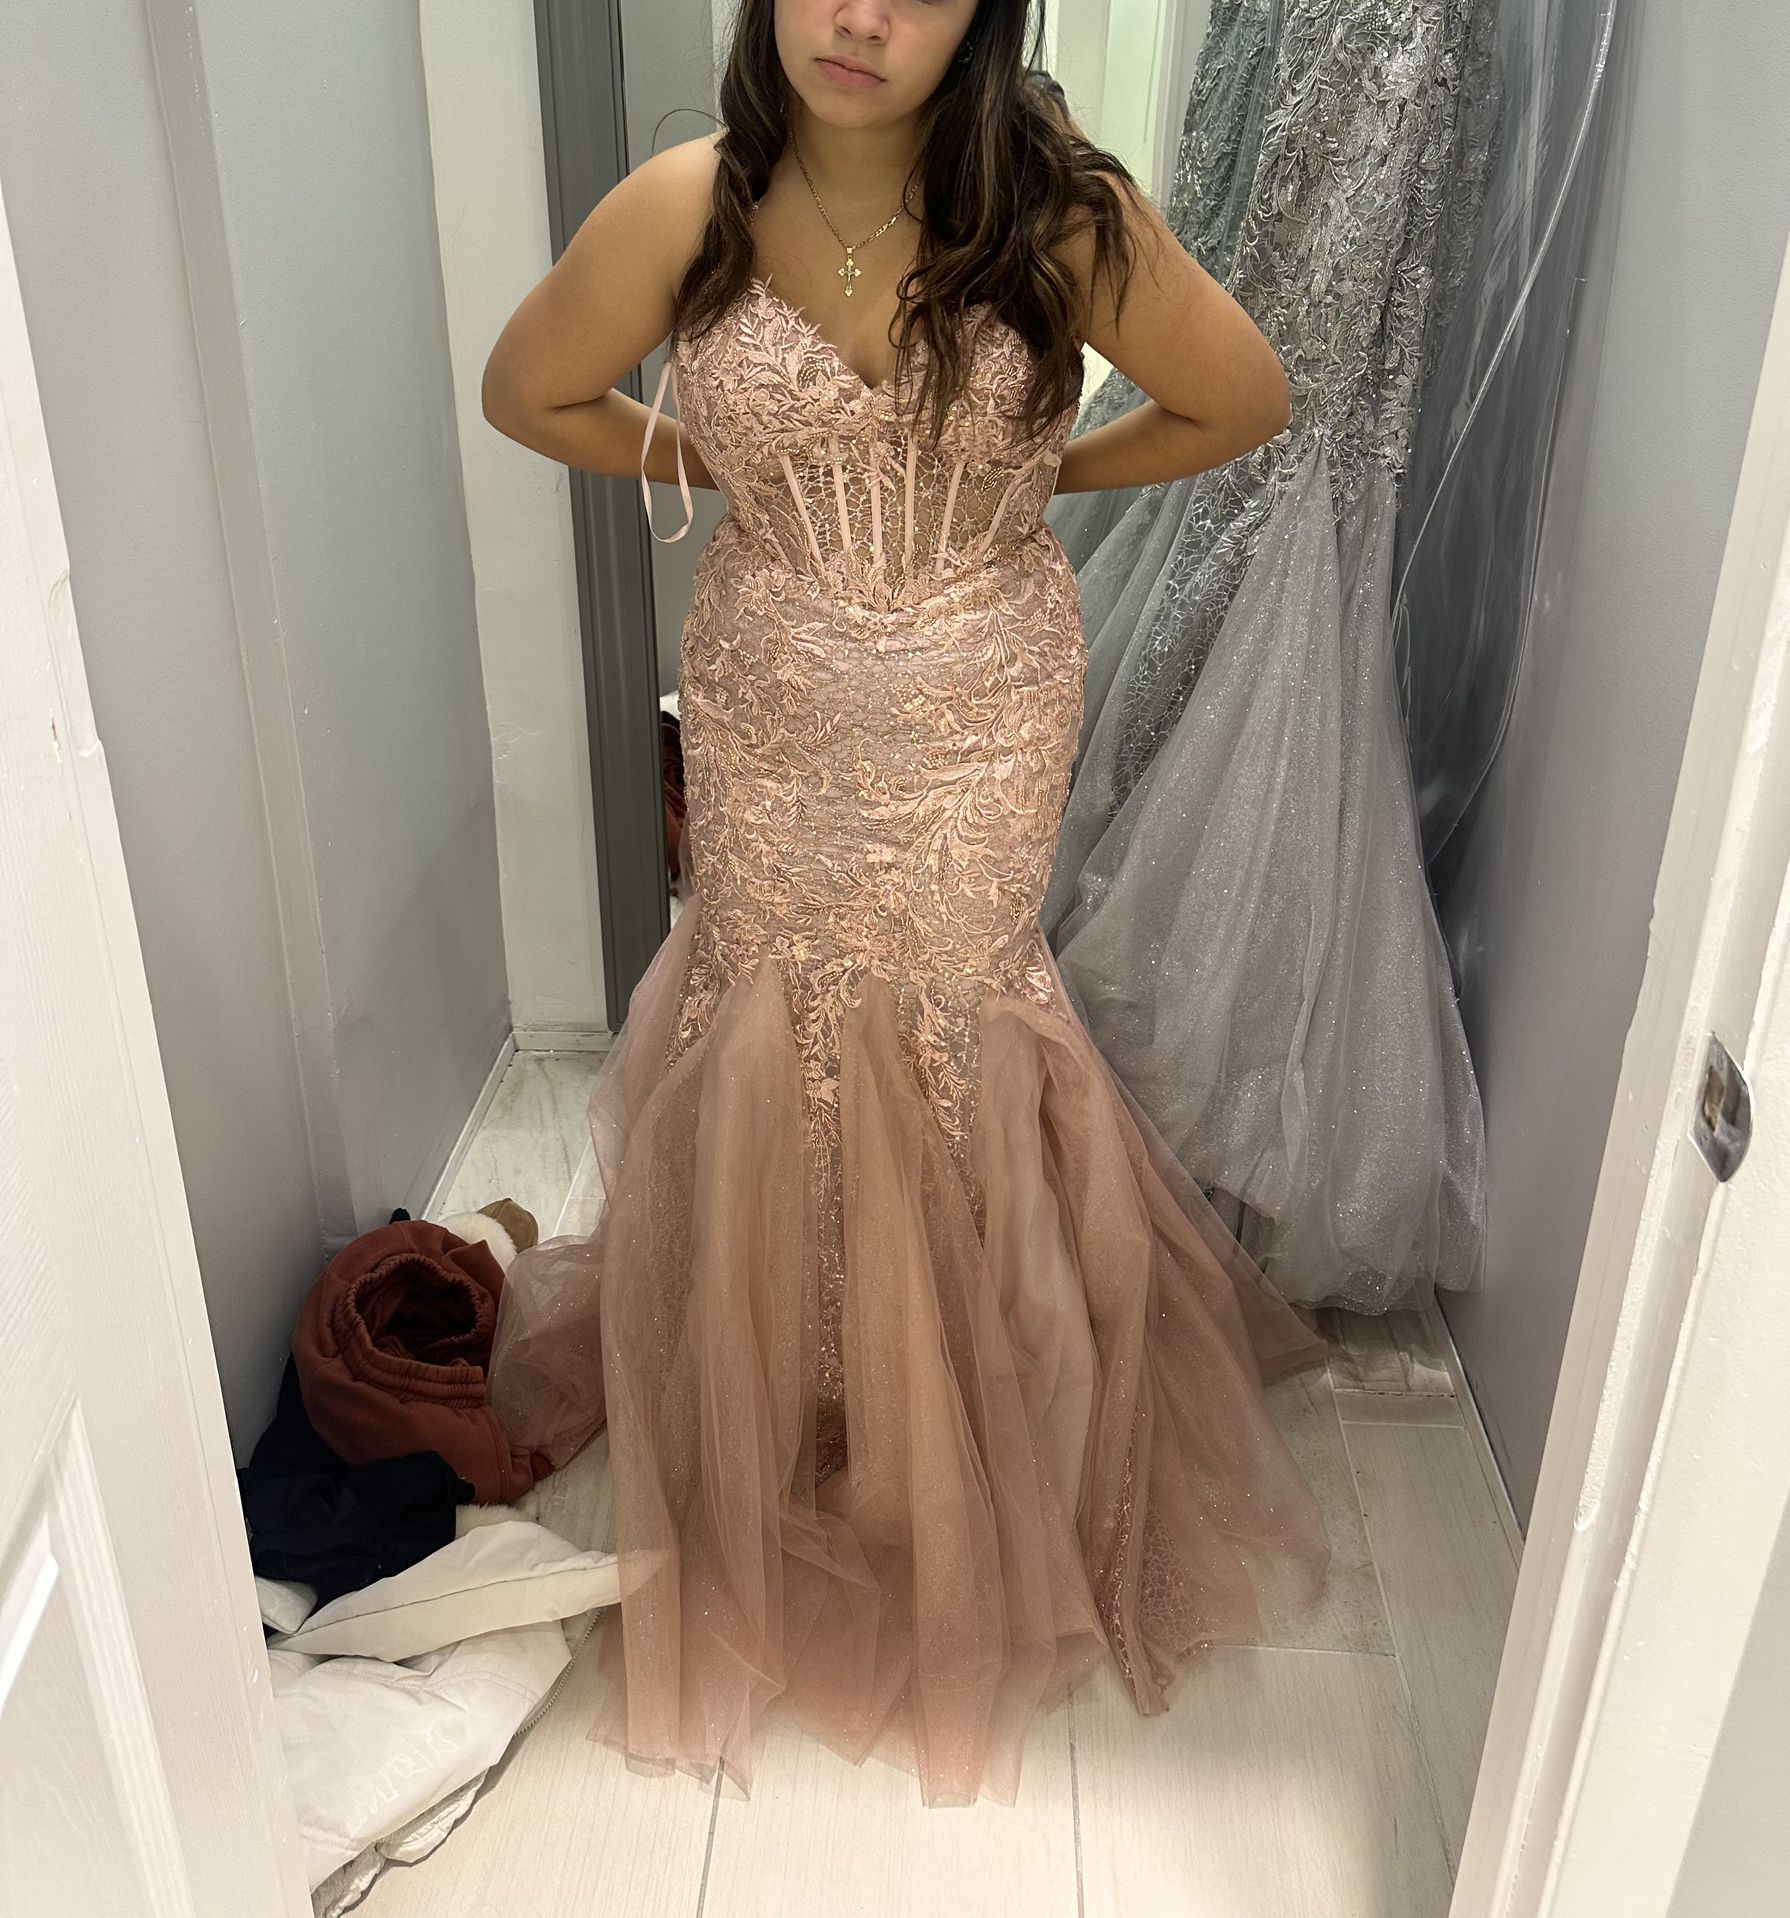 Prom/ Sweet 16 dress only tried on 